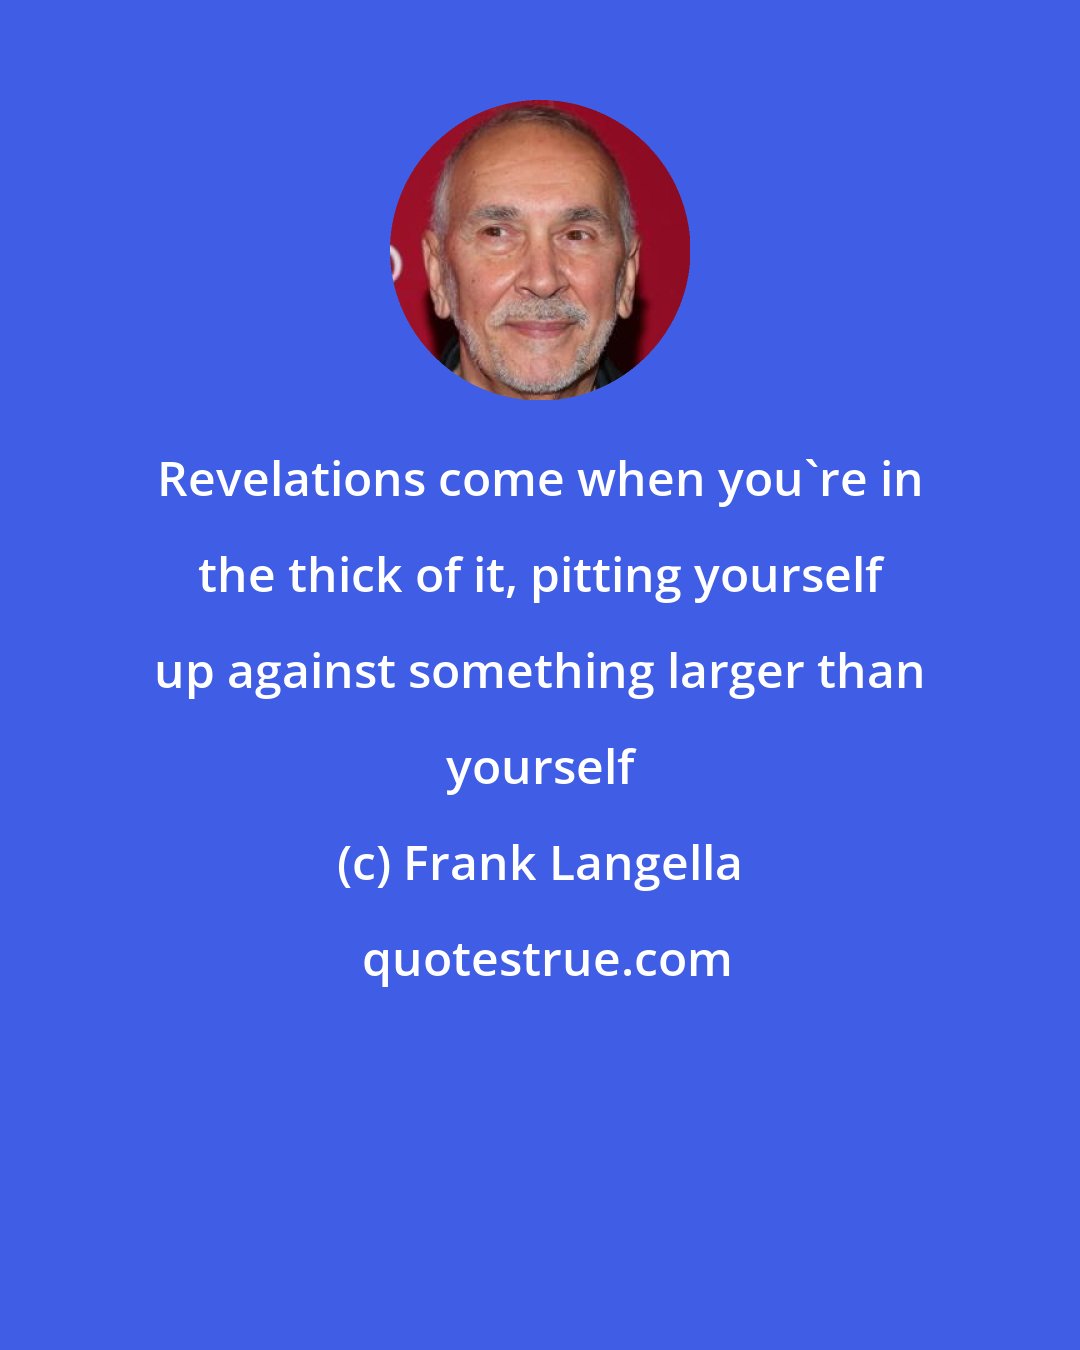 Frank Langella: Revelations come when you're in the thick of it, pitting yourself up against something larger than yourself